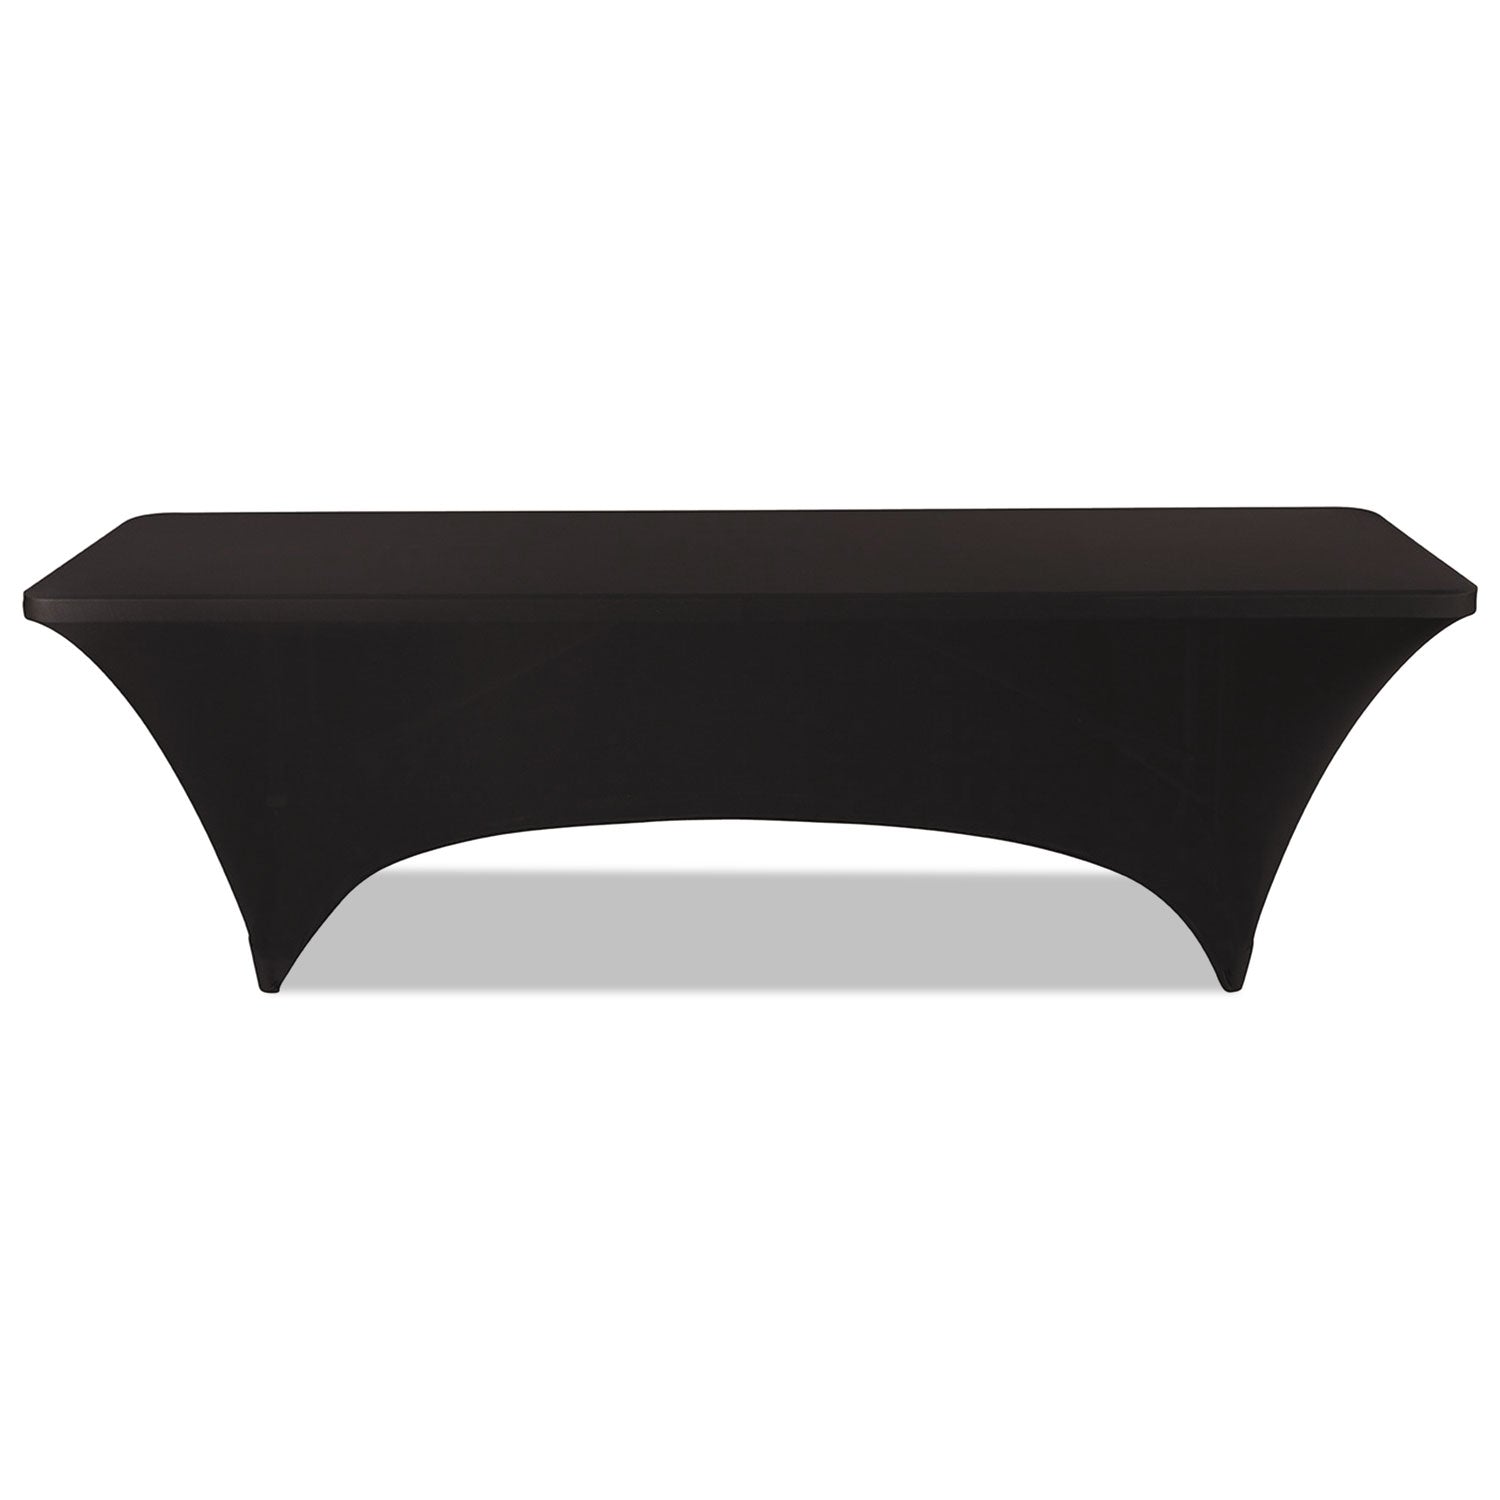 iGear Fabric Table Cover, Polyester/Spandex, 30" x 96", Black - 